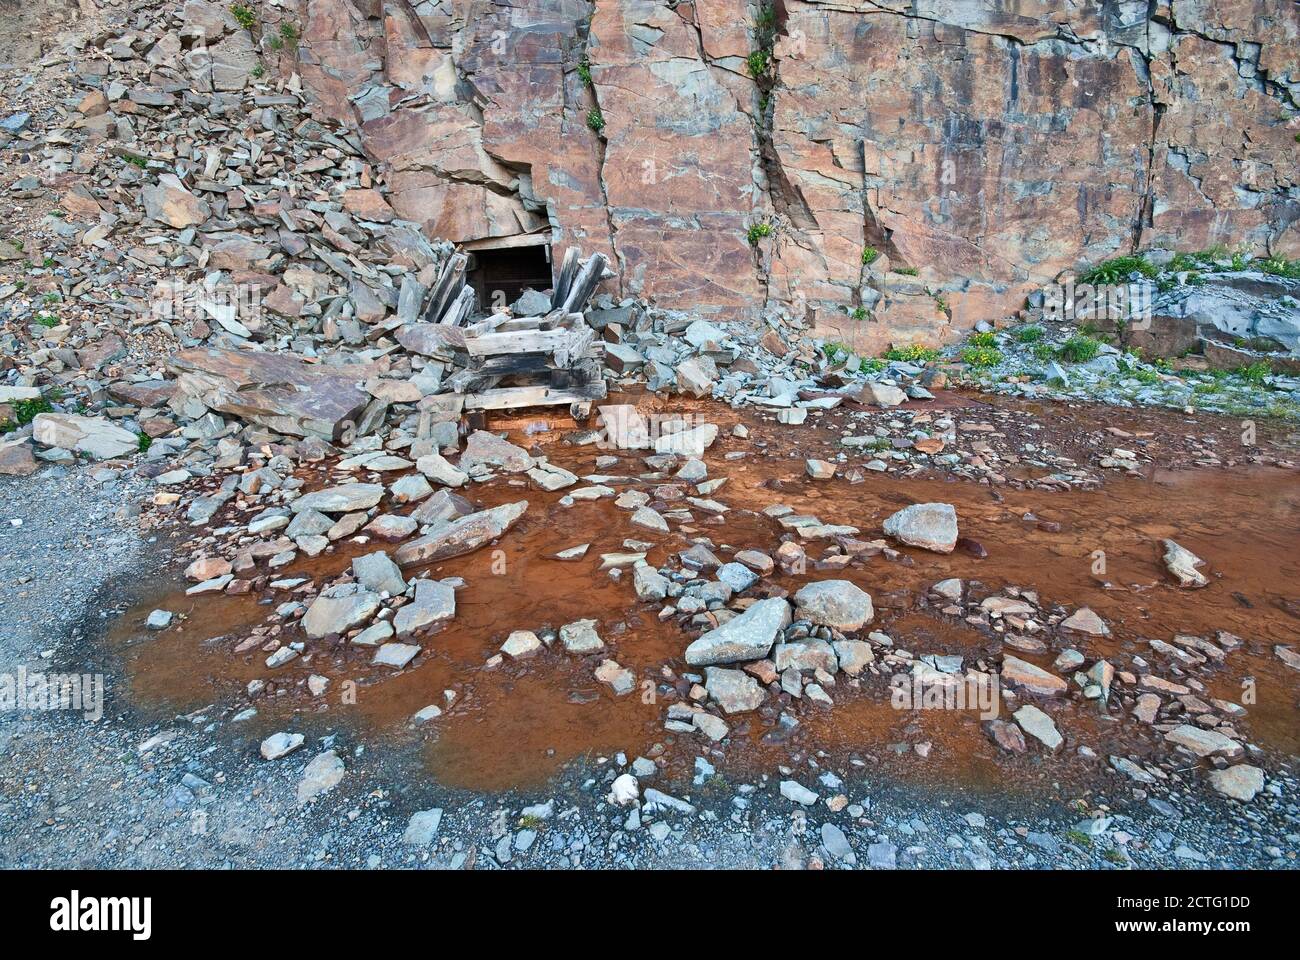 Adit entrance to underground gold mine, rust colored water coming out of tunnel, road to Clear Lake, San Juan Mountains, near Silverton, Colorado, USA Stock Photo